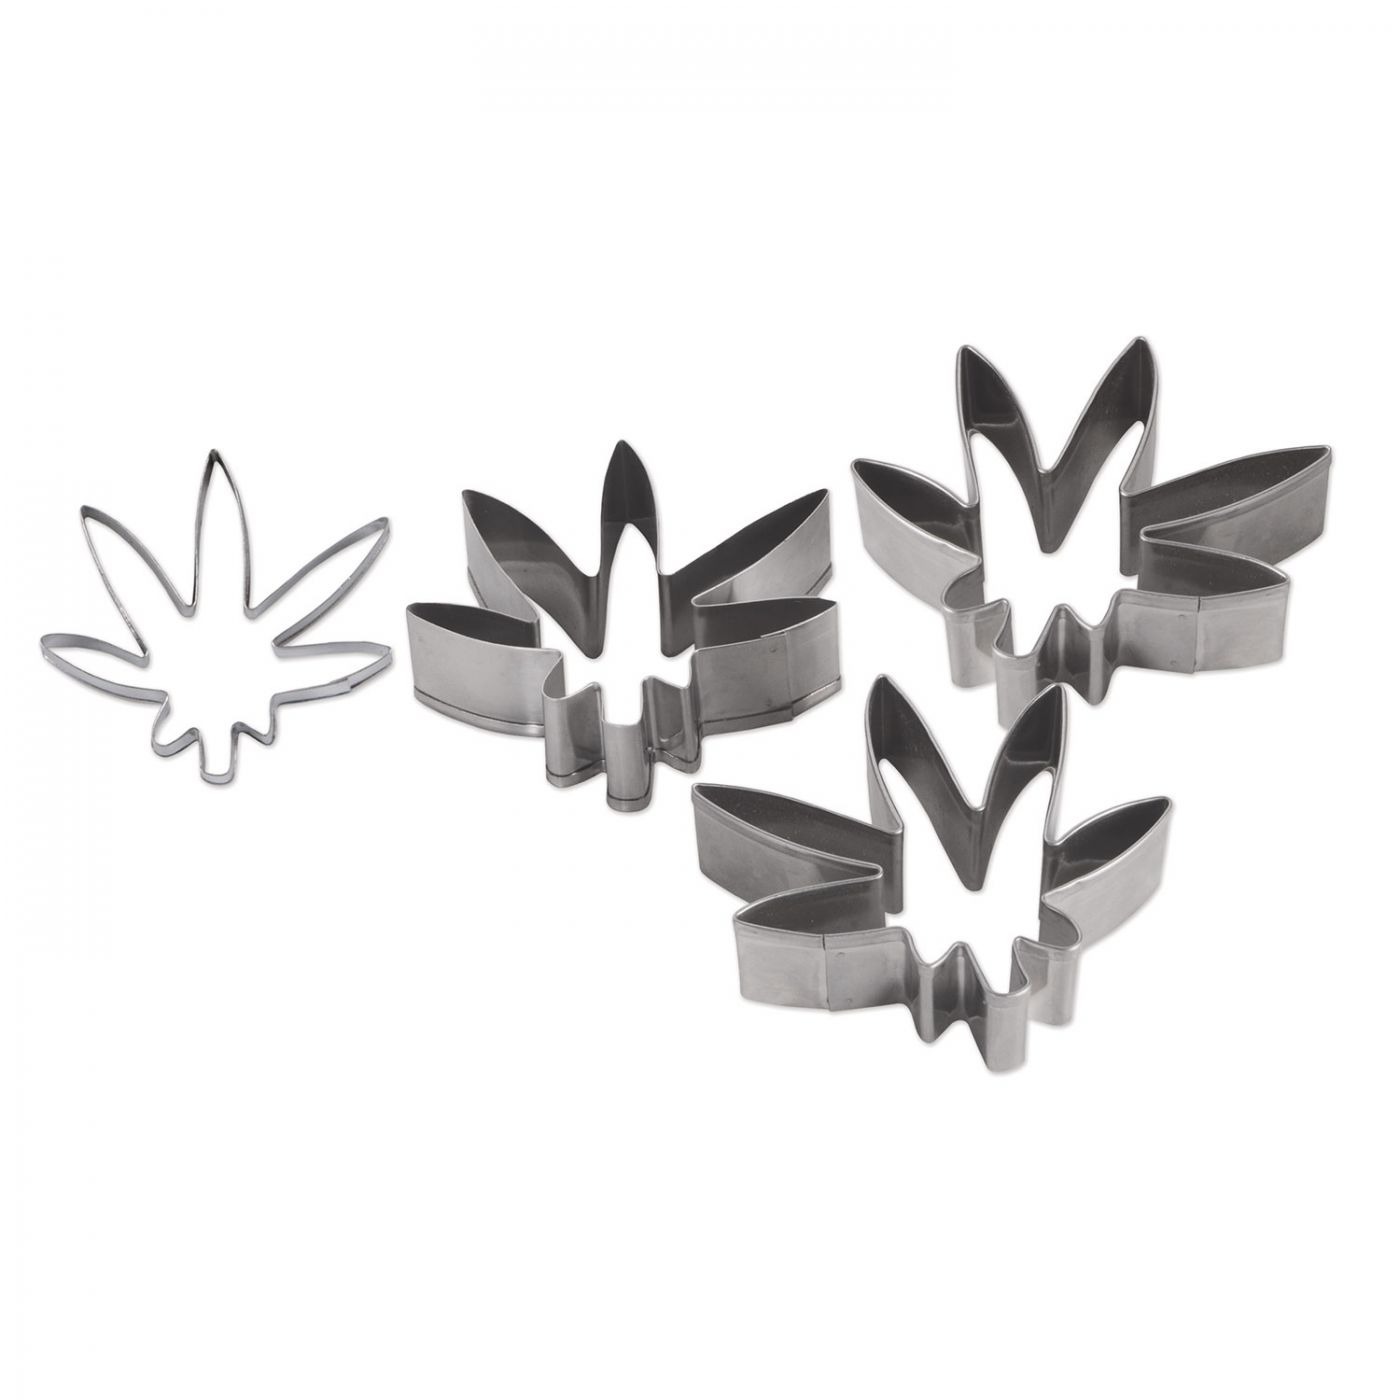 Weed Cookie Cutters image